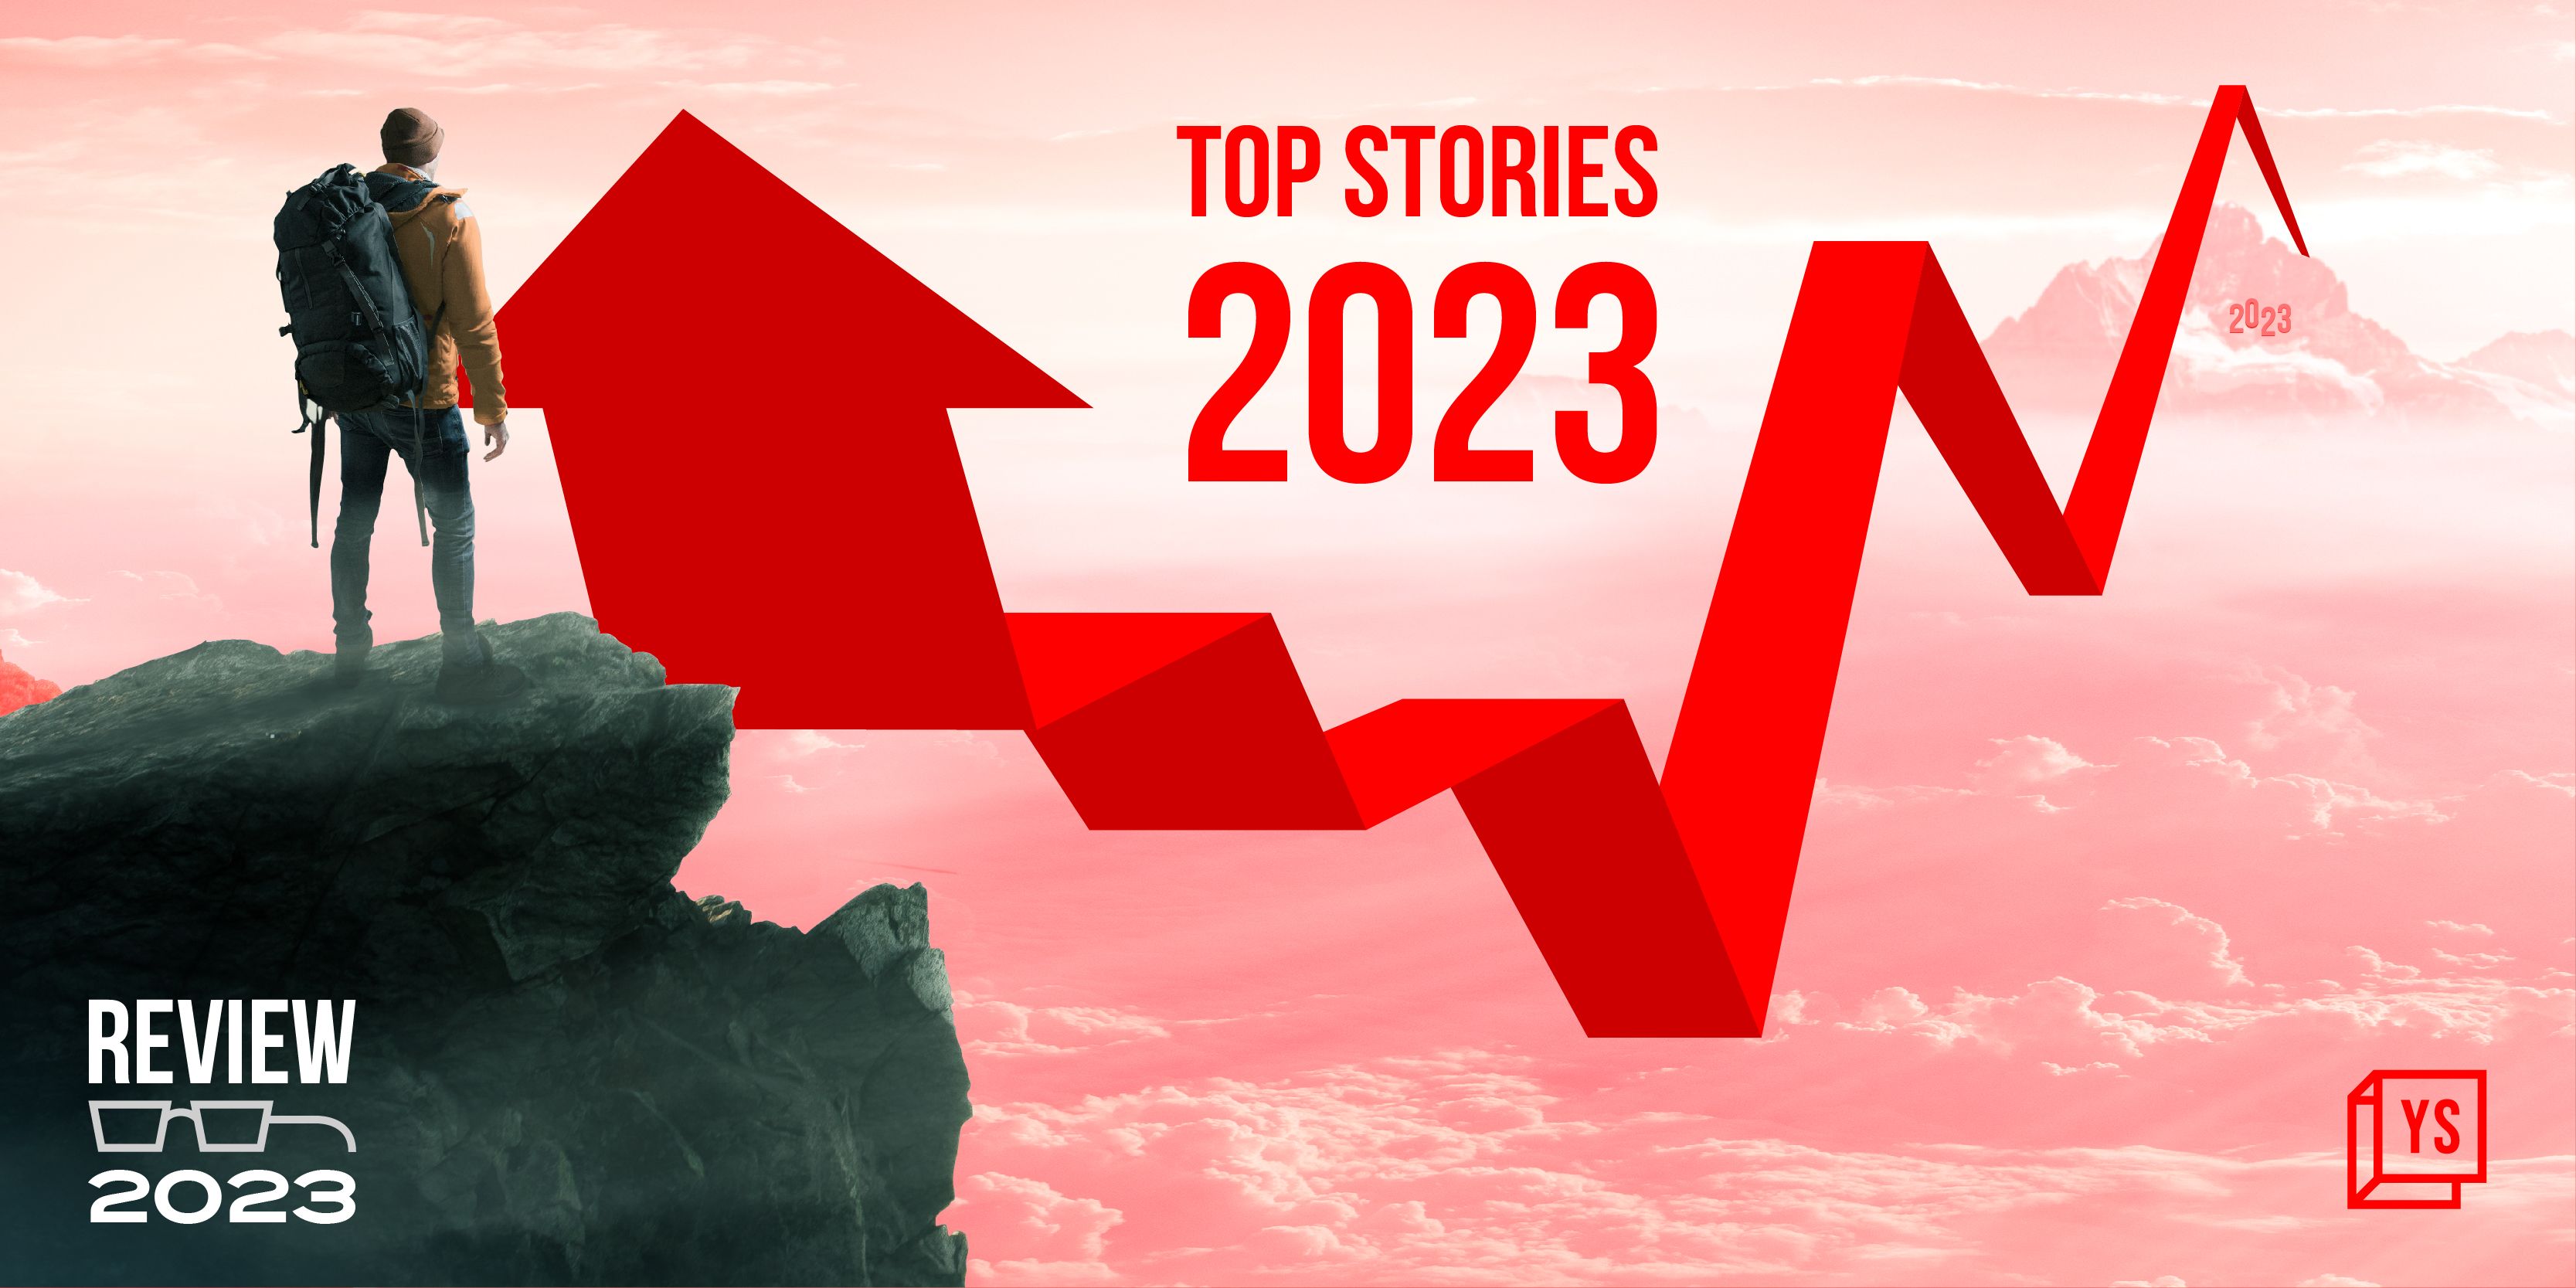 Relive the top stories of 2023 from the startup world